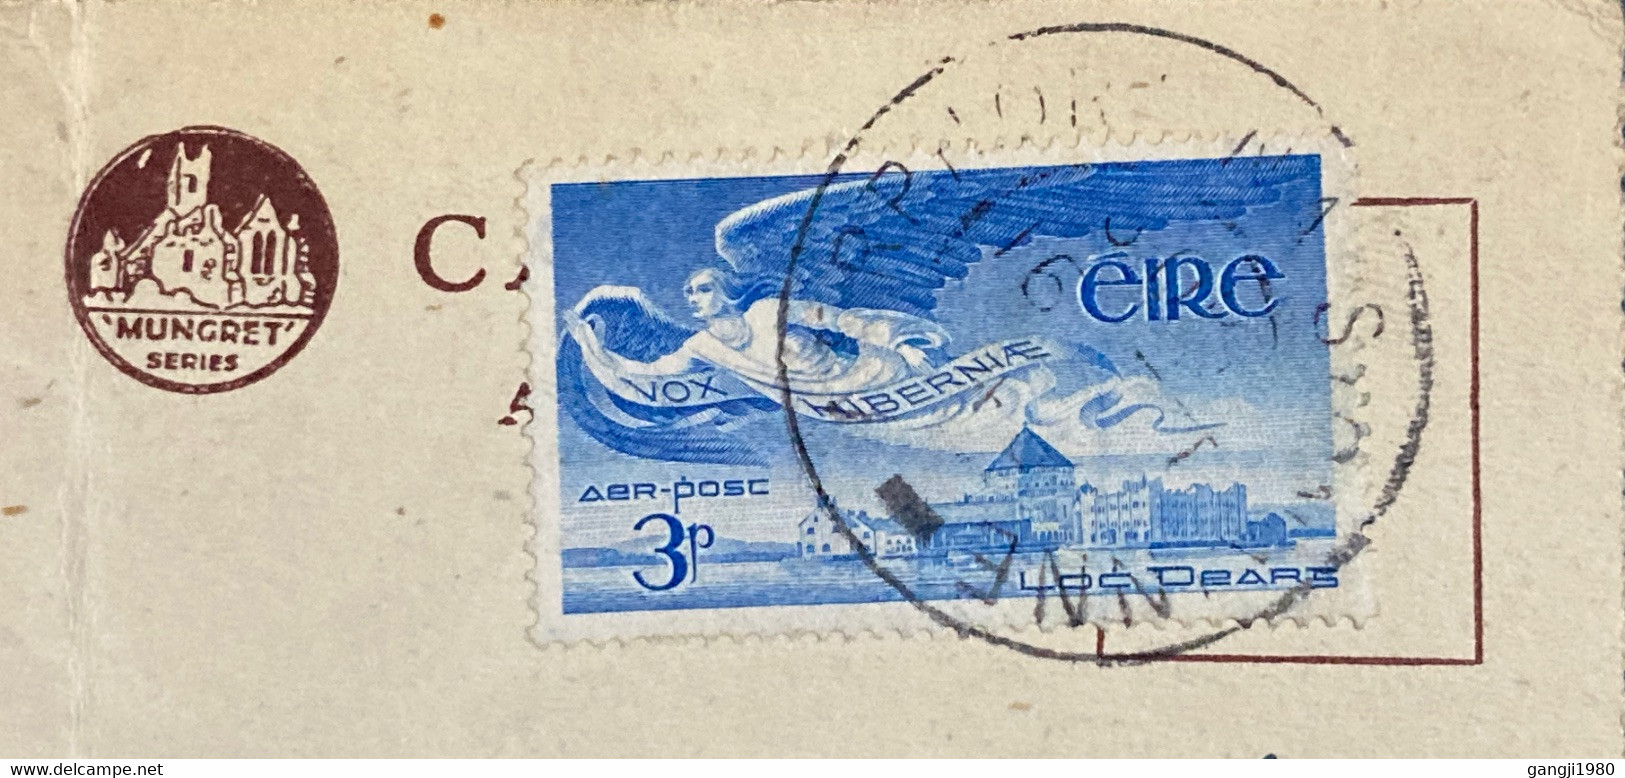 IRELAND 1948, USED POSTCARD TO USA, TREATY STONE & KING JOHN'S CASTLE,LIMERICK CITY,3D BLUE AIR STAMP - Covers & Documents